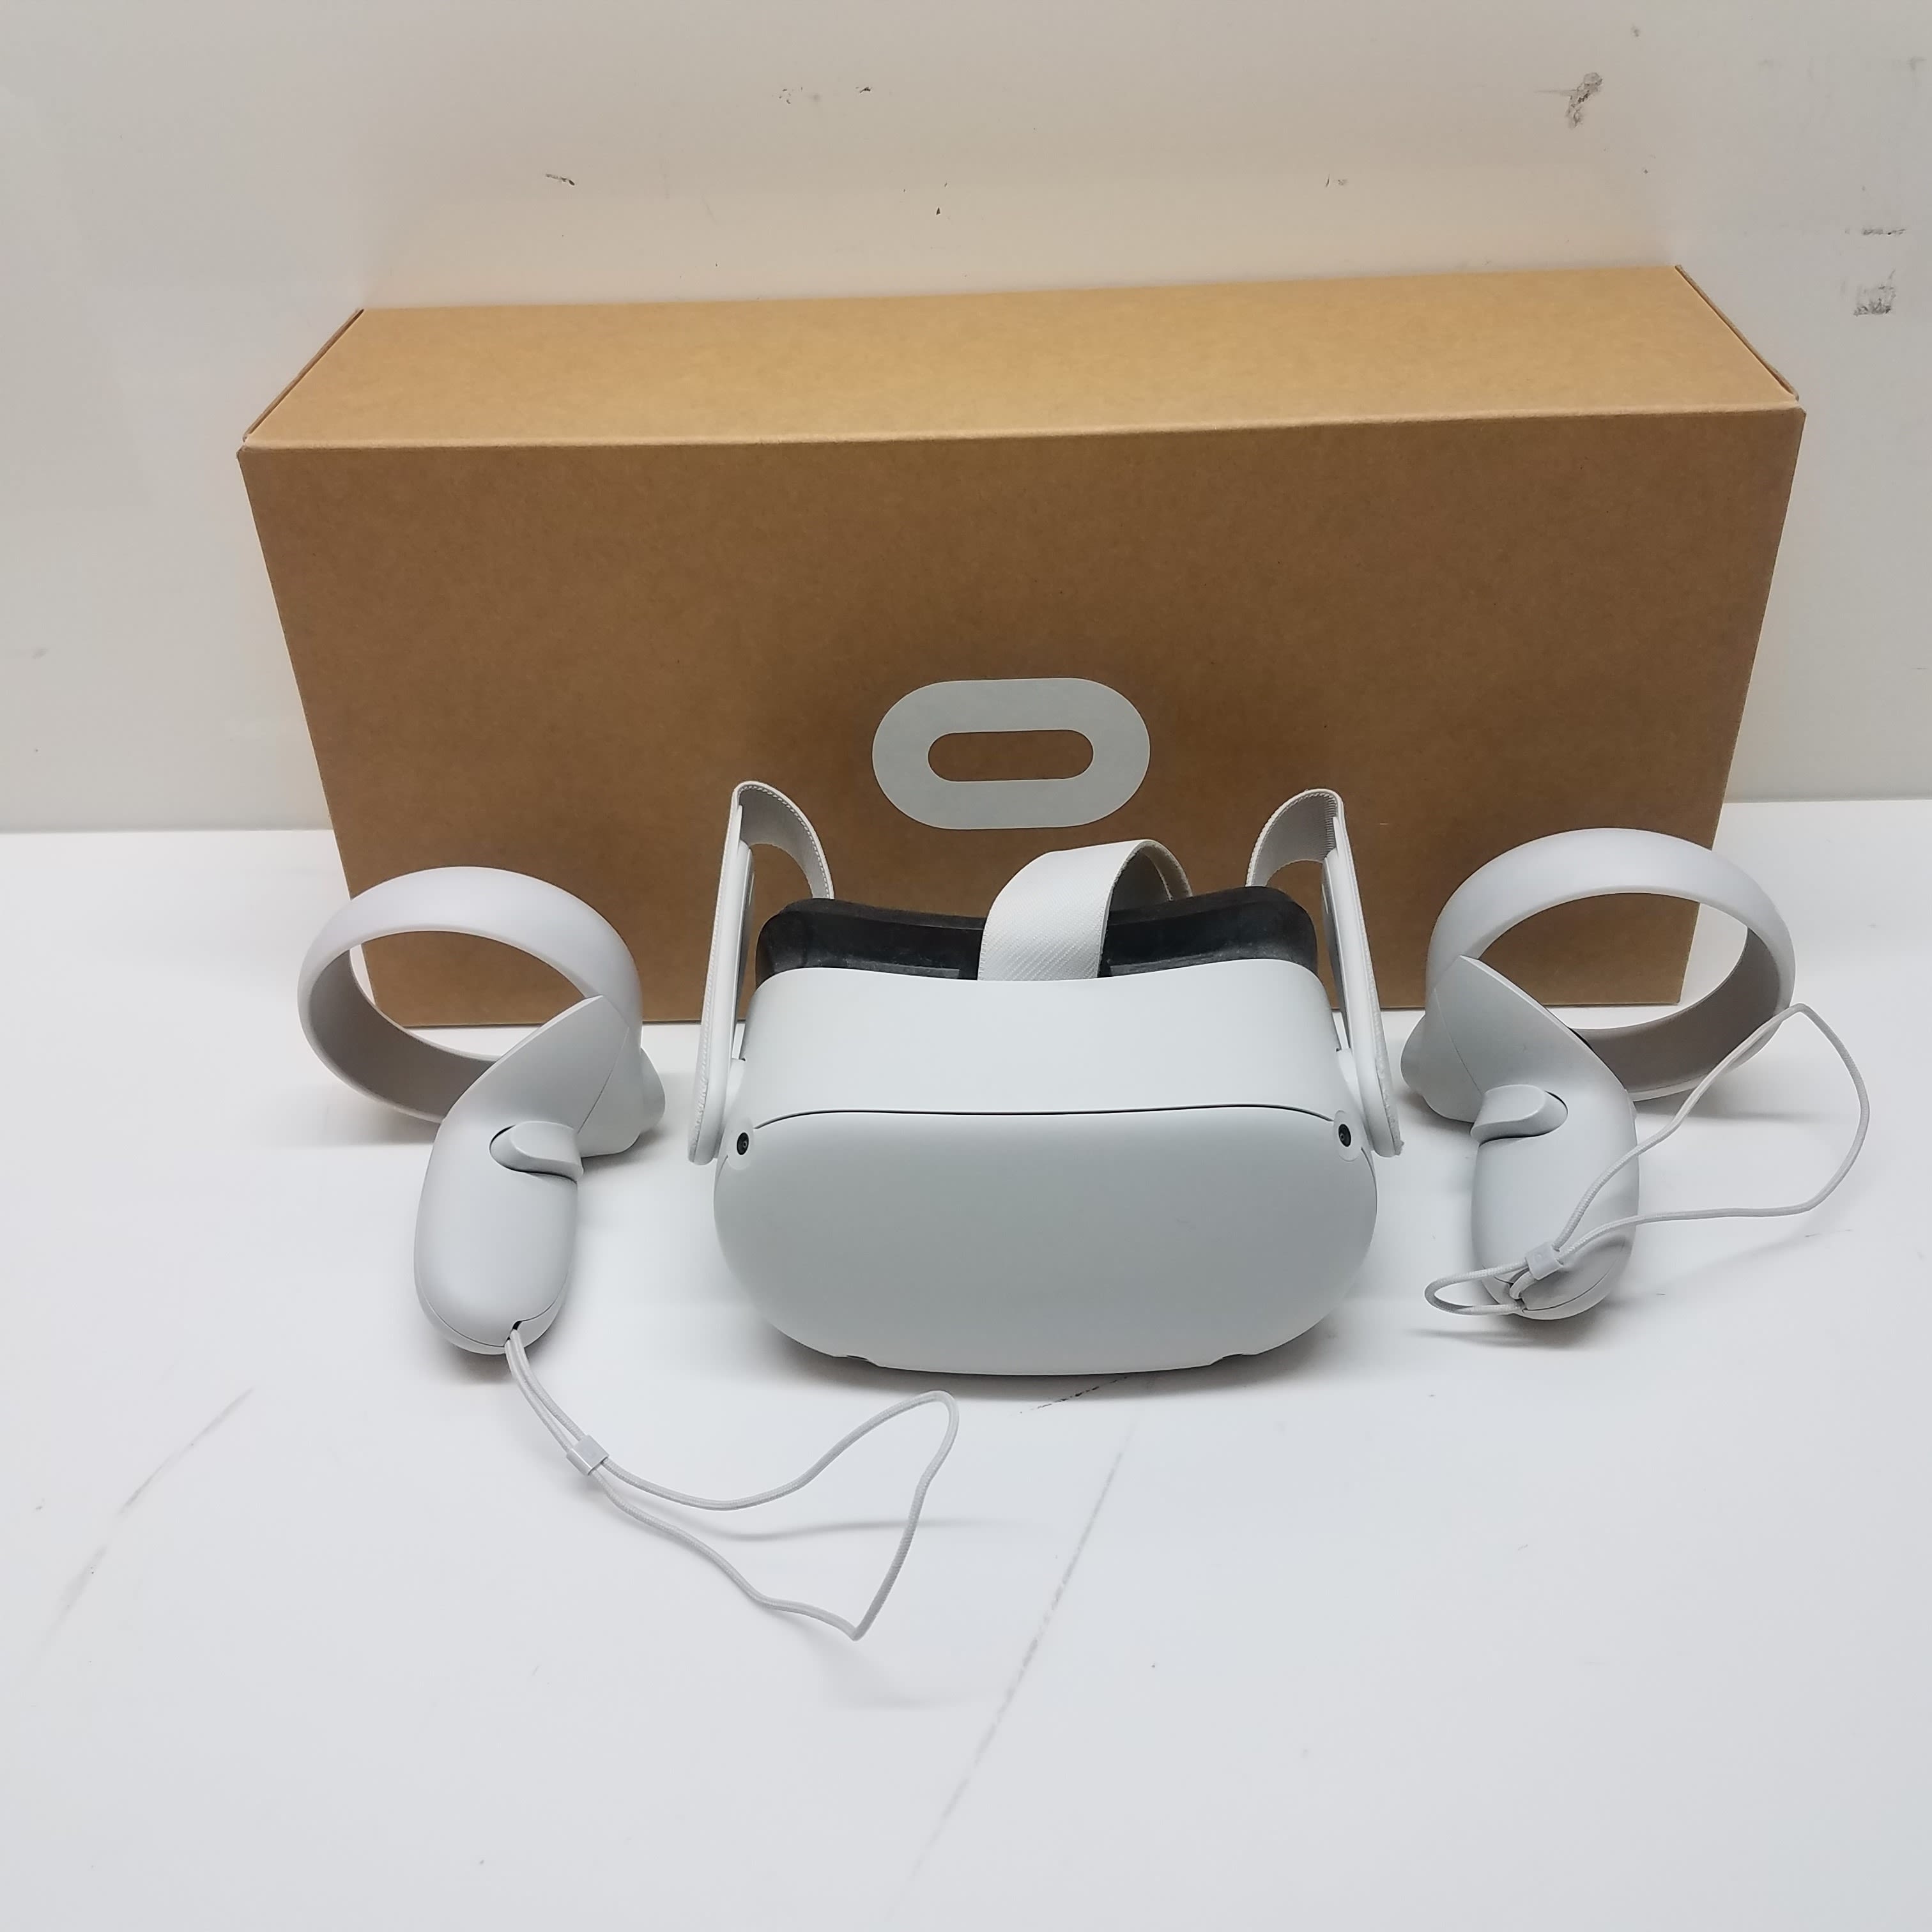 Buy the Meta Oculus Quest 2 64GB Standalone VR Headset - White 